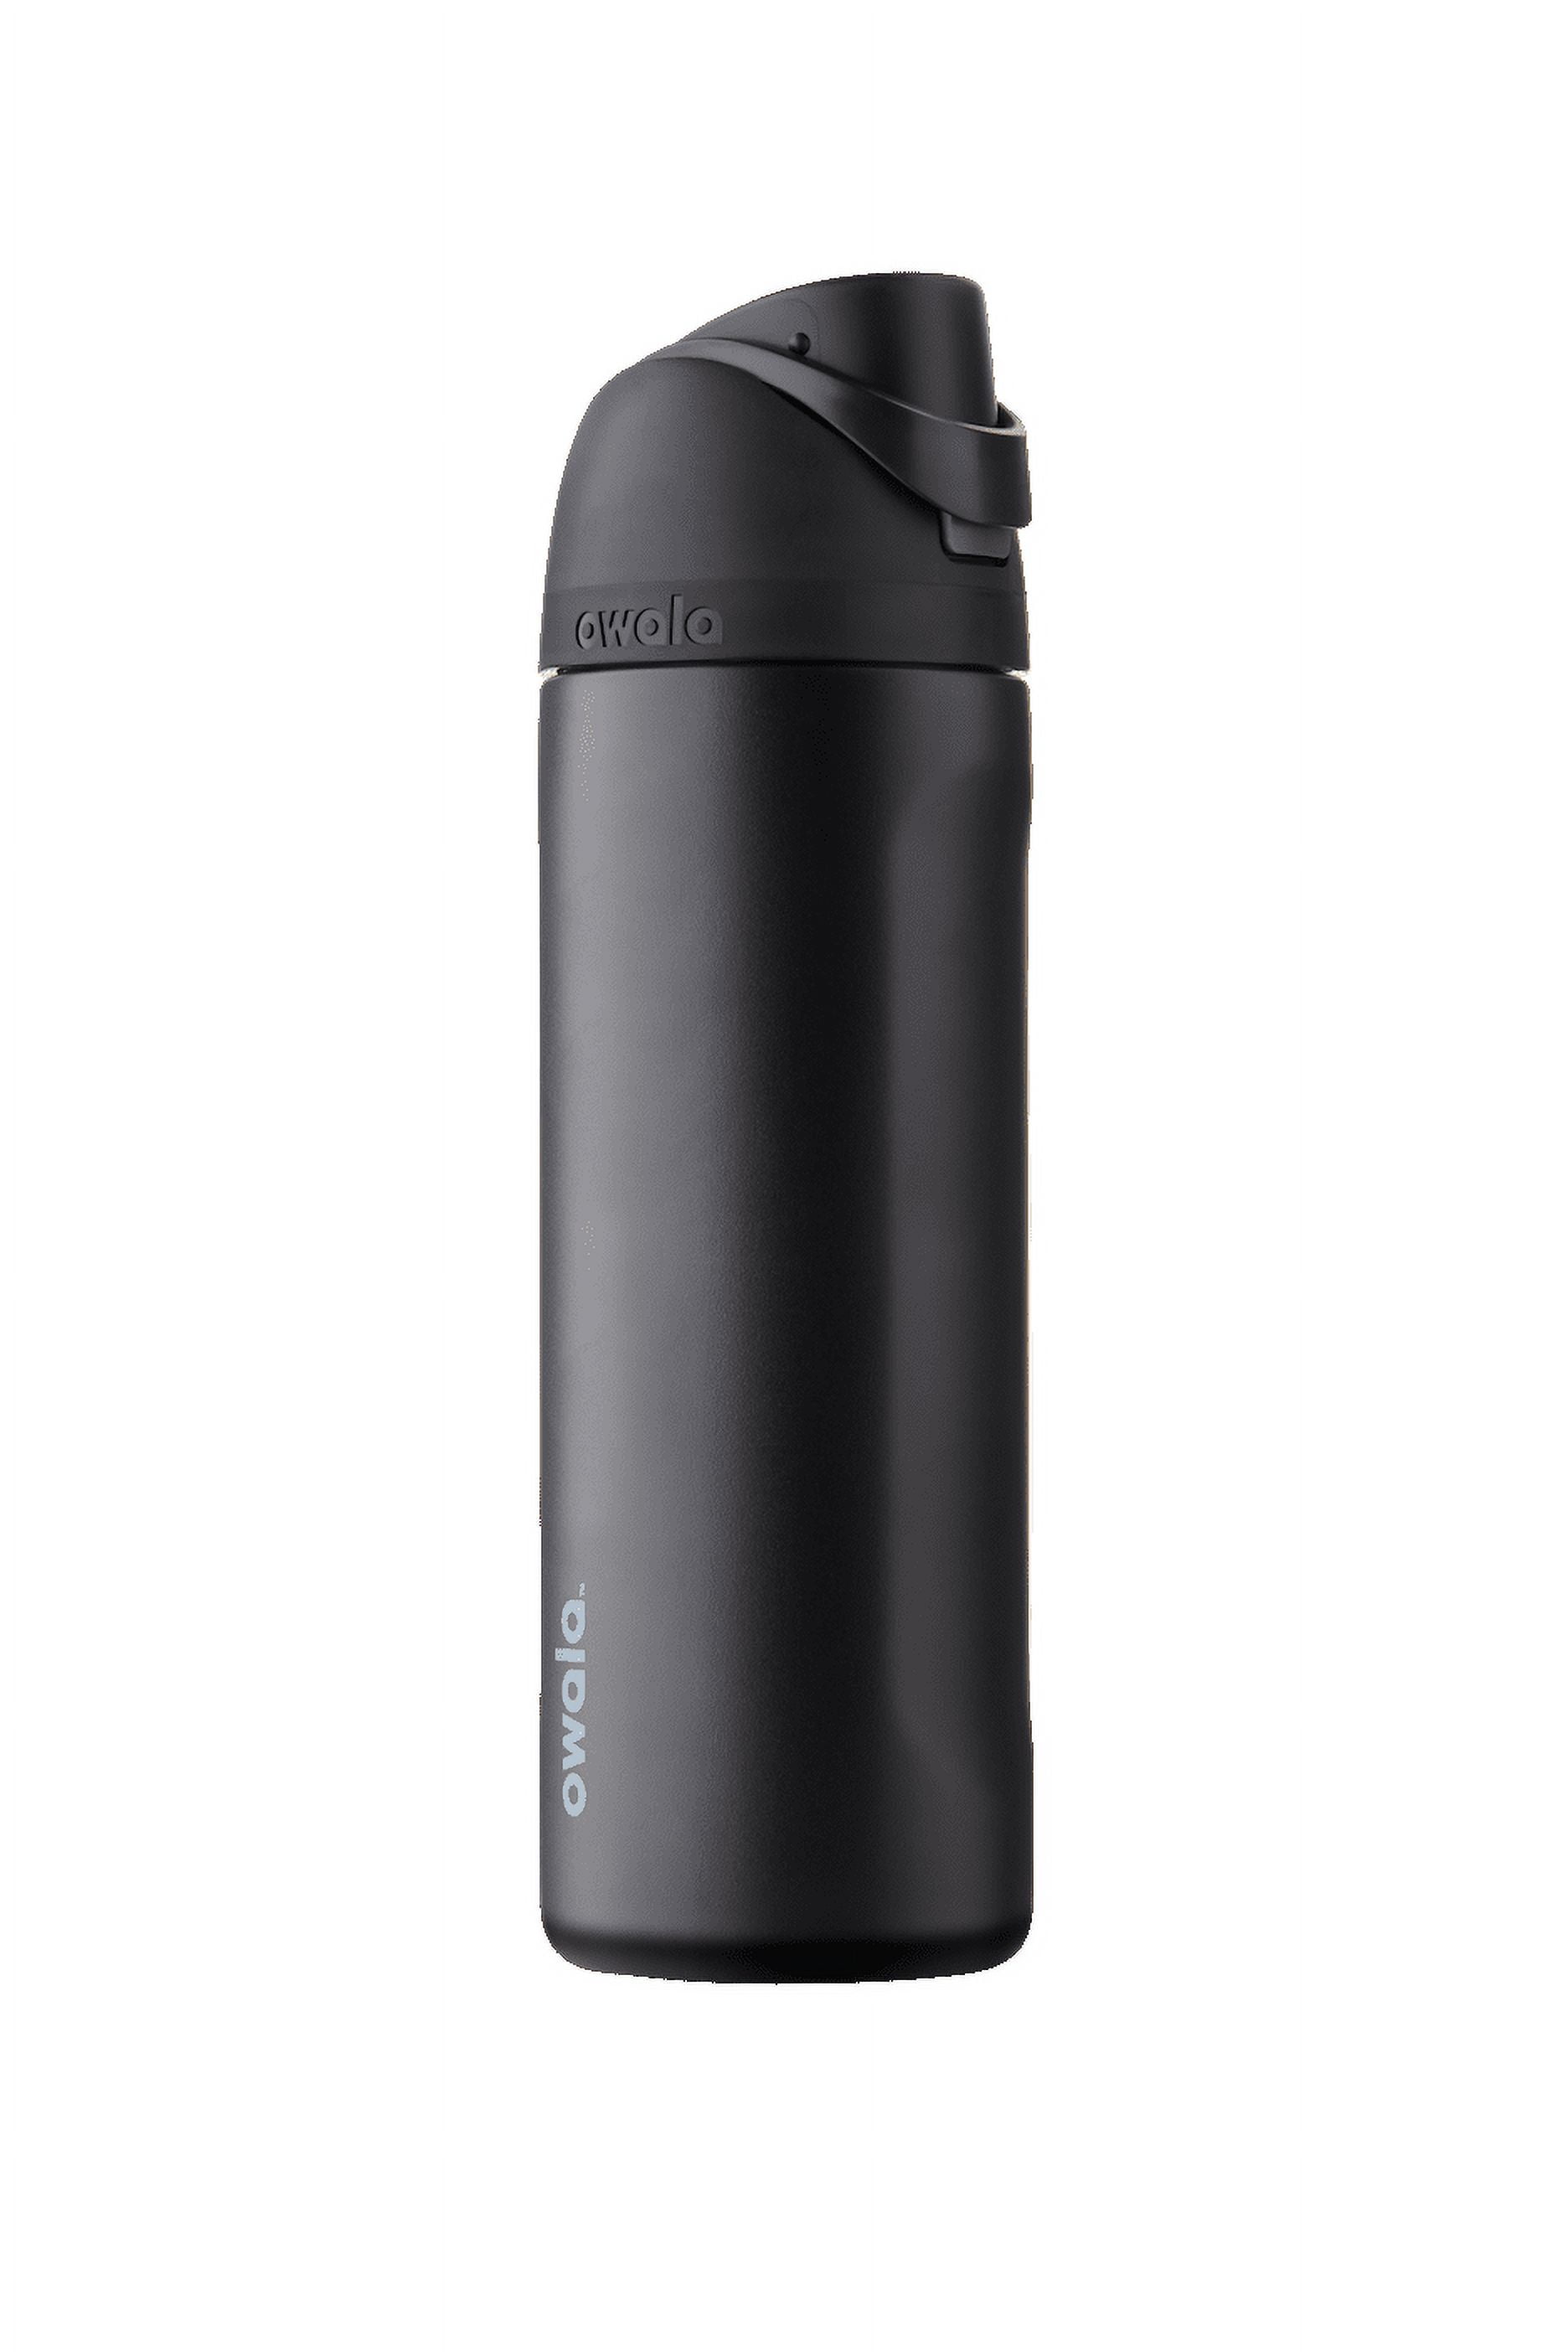 Owala FreeSip 24 oz. Vacuum Insulated Stainless Steel Water Bottle 